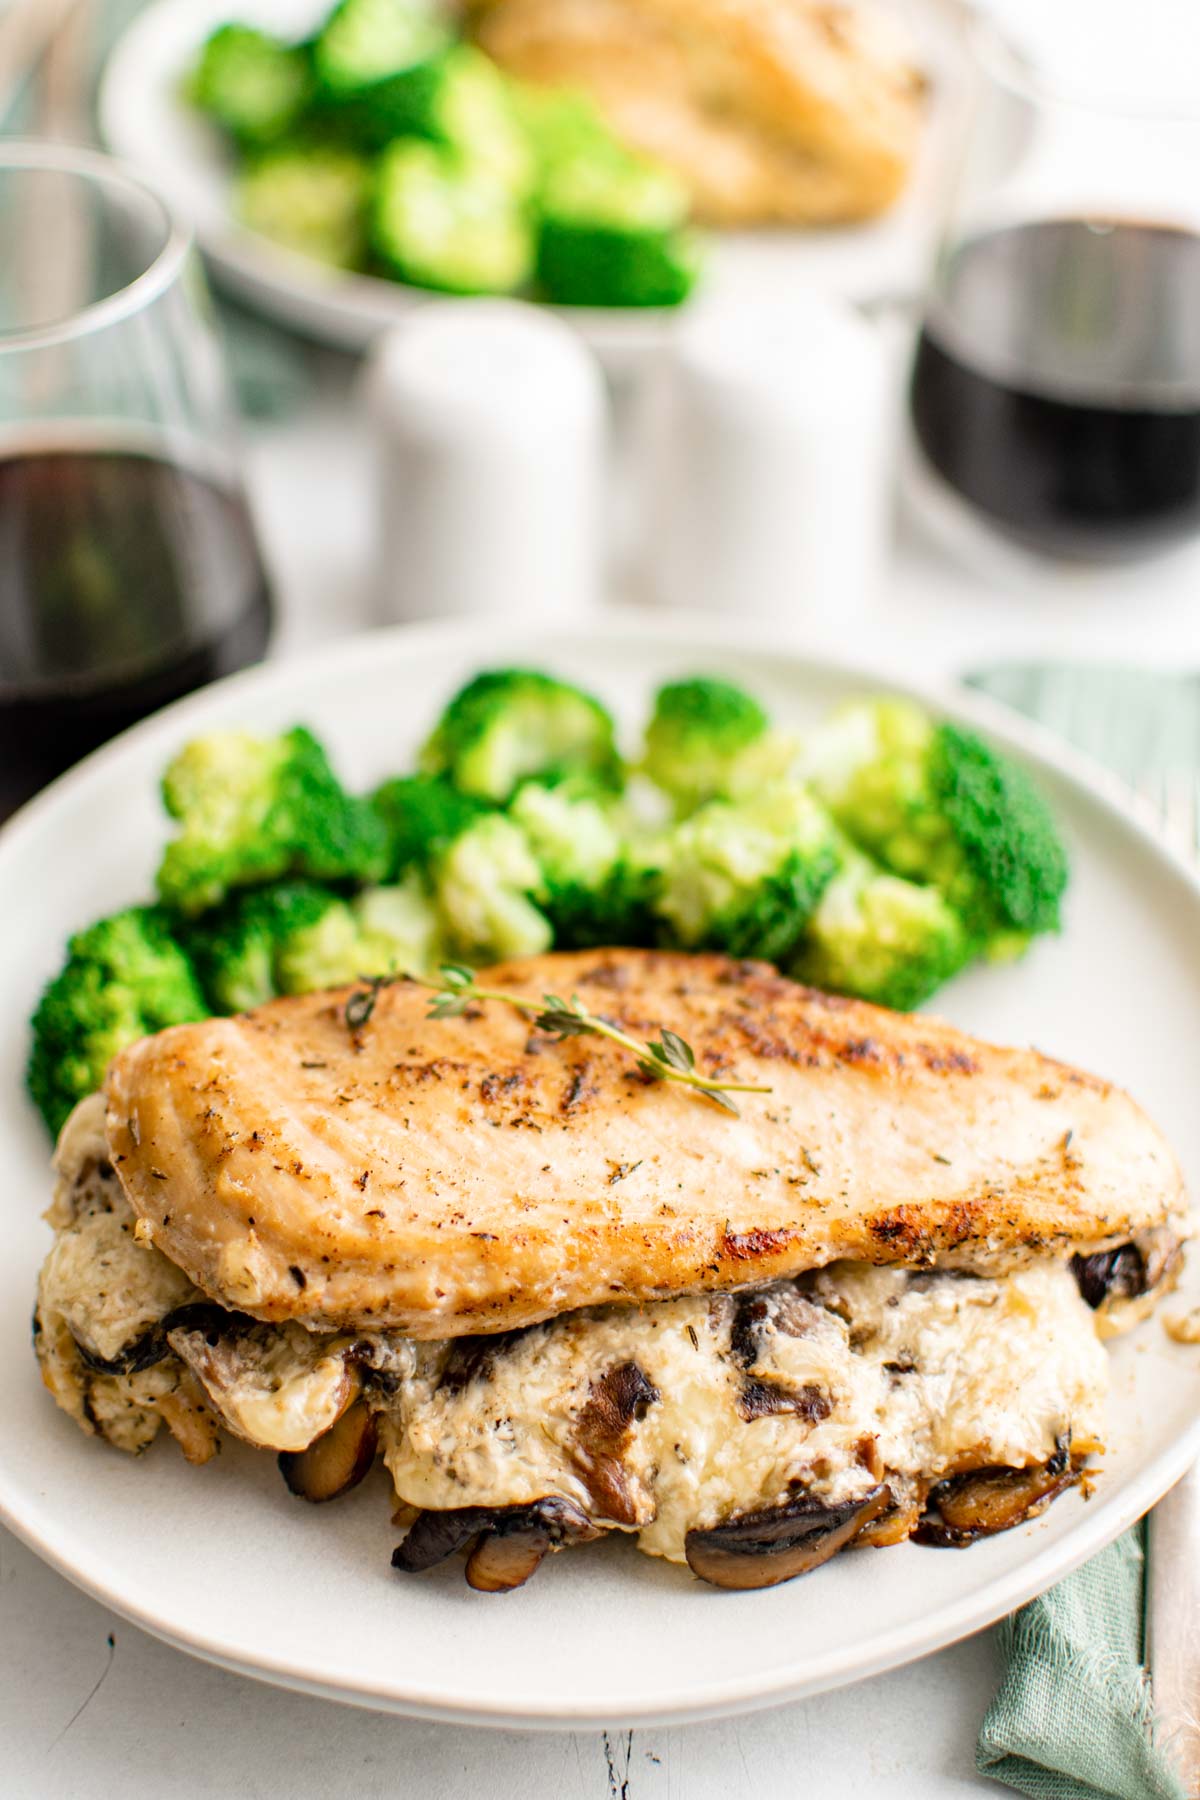 the completed mushroom stuffed chicken breast served with a side of broccoli on a white dinner plate with a glass of red wine